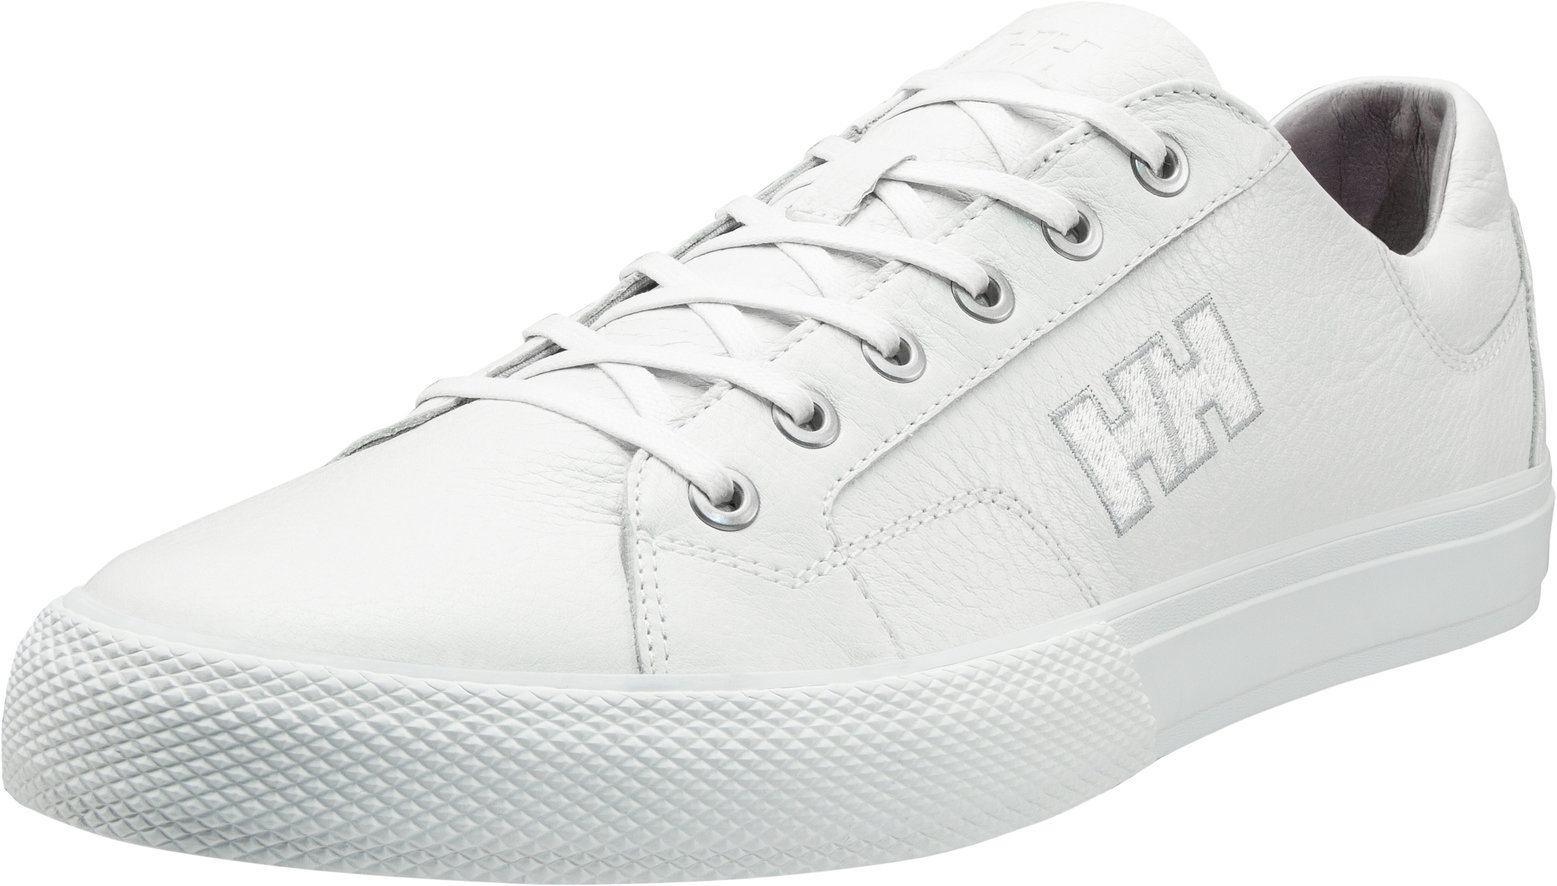 Mens Sailing Shoes Helly Hansen Fjord LV-2 Off White - 44.5